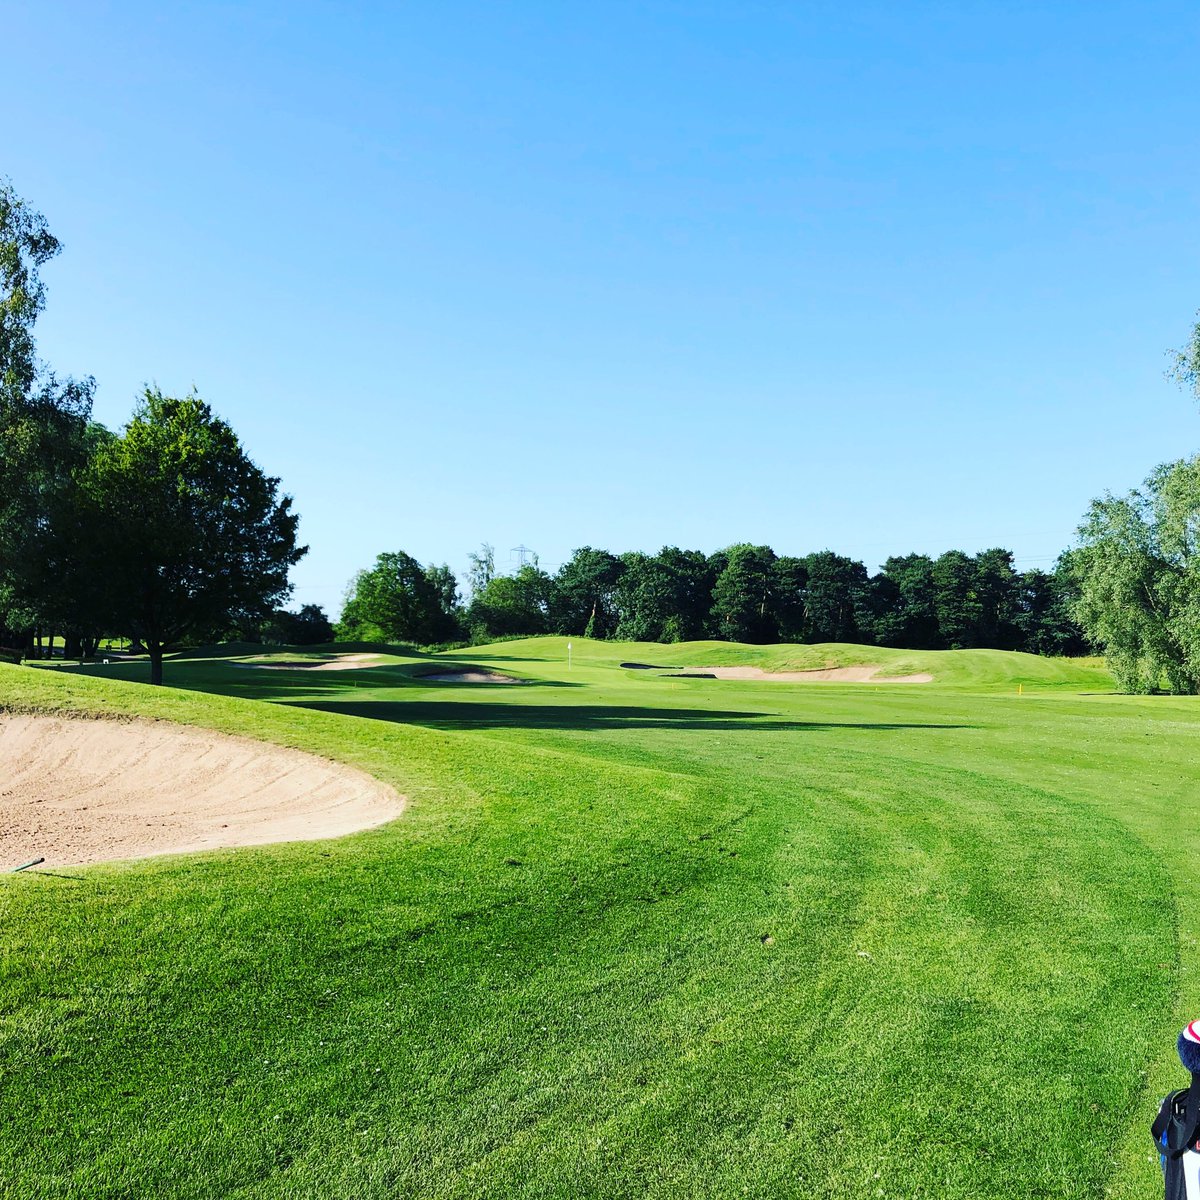 Few Holes after work #Brabazon @TheBelfryHotel 🏌️‍♂️ course is beautiful is the sunshine ☀️ #golf #corporategolf #societygolf